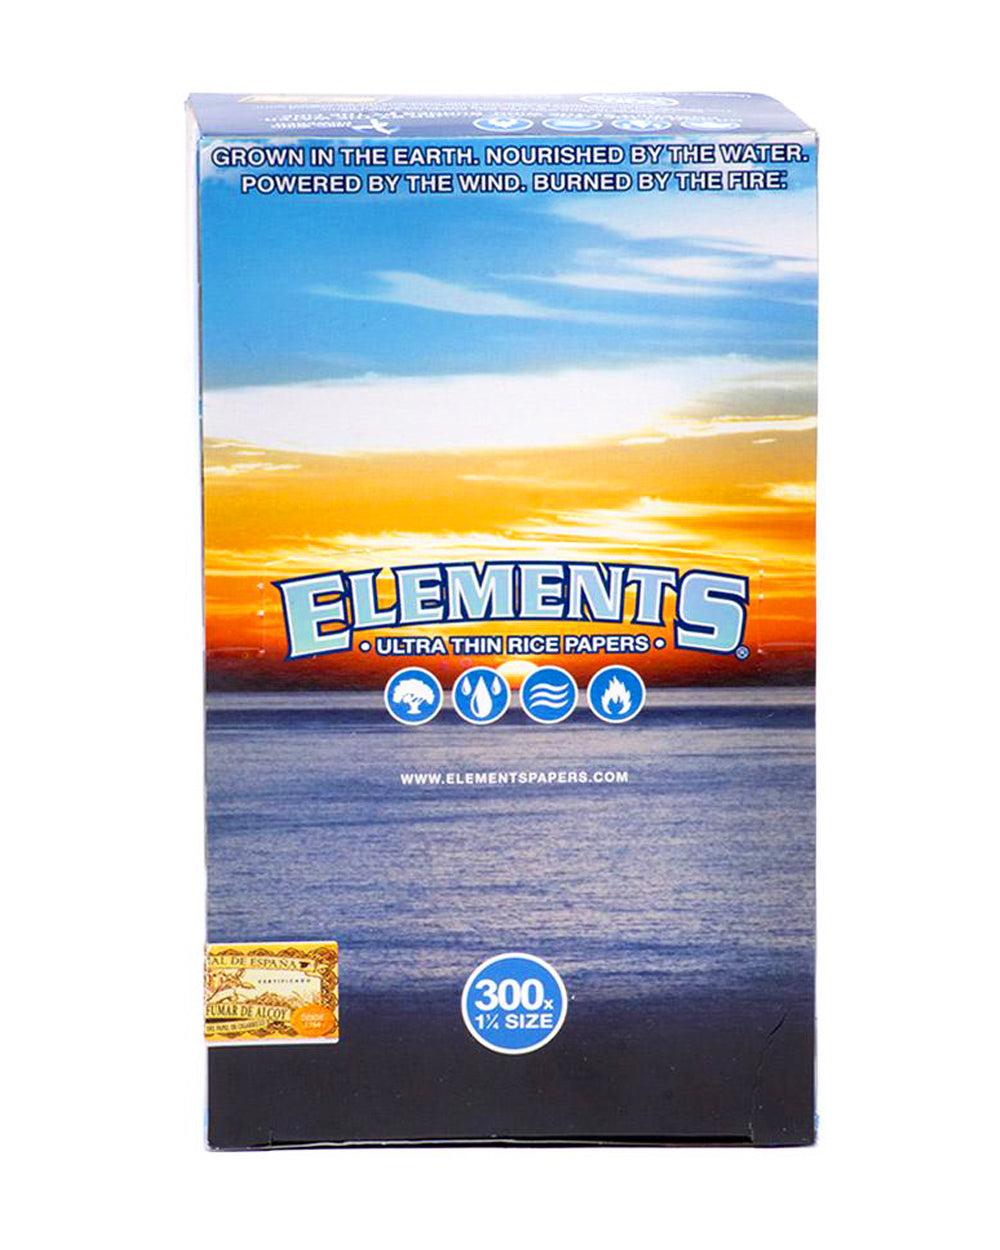 ELEMENTS | 'Retail Display' 300x 1 1/4 Size Ultra Thin Rolling Papers | 83mm - Rice Paper - 20 Count - 2